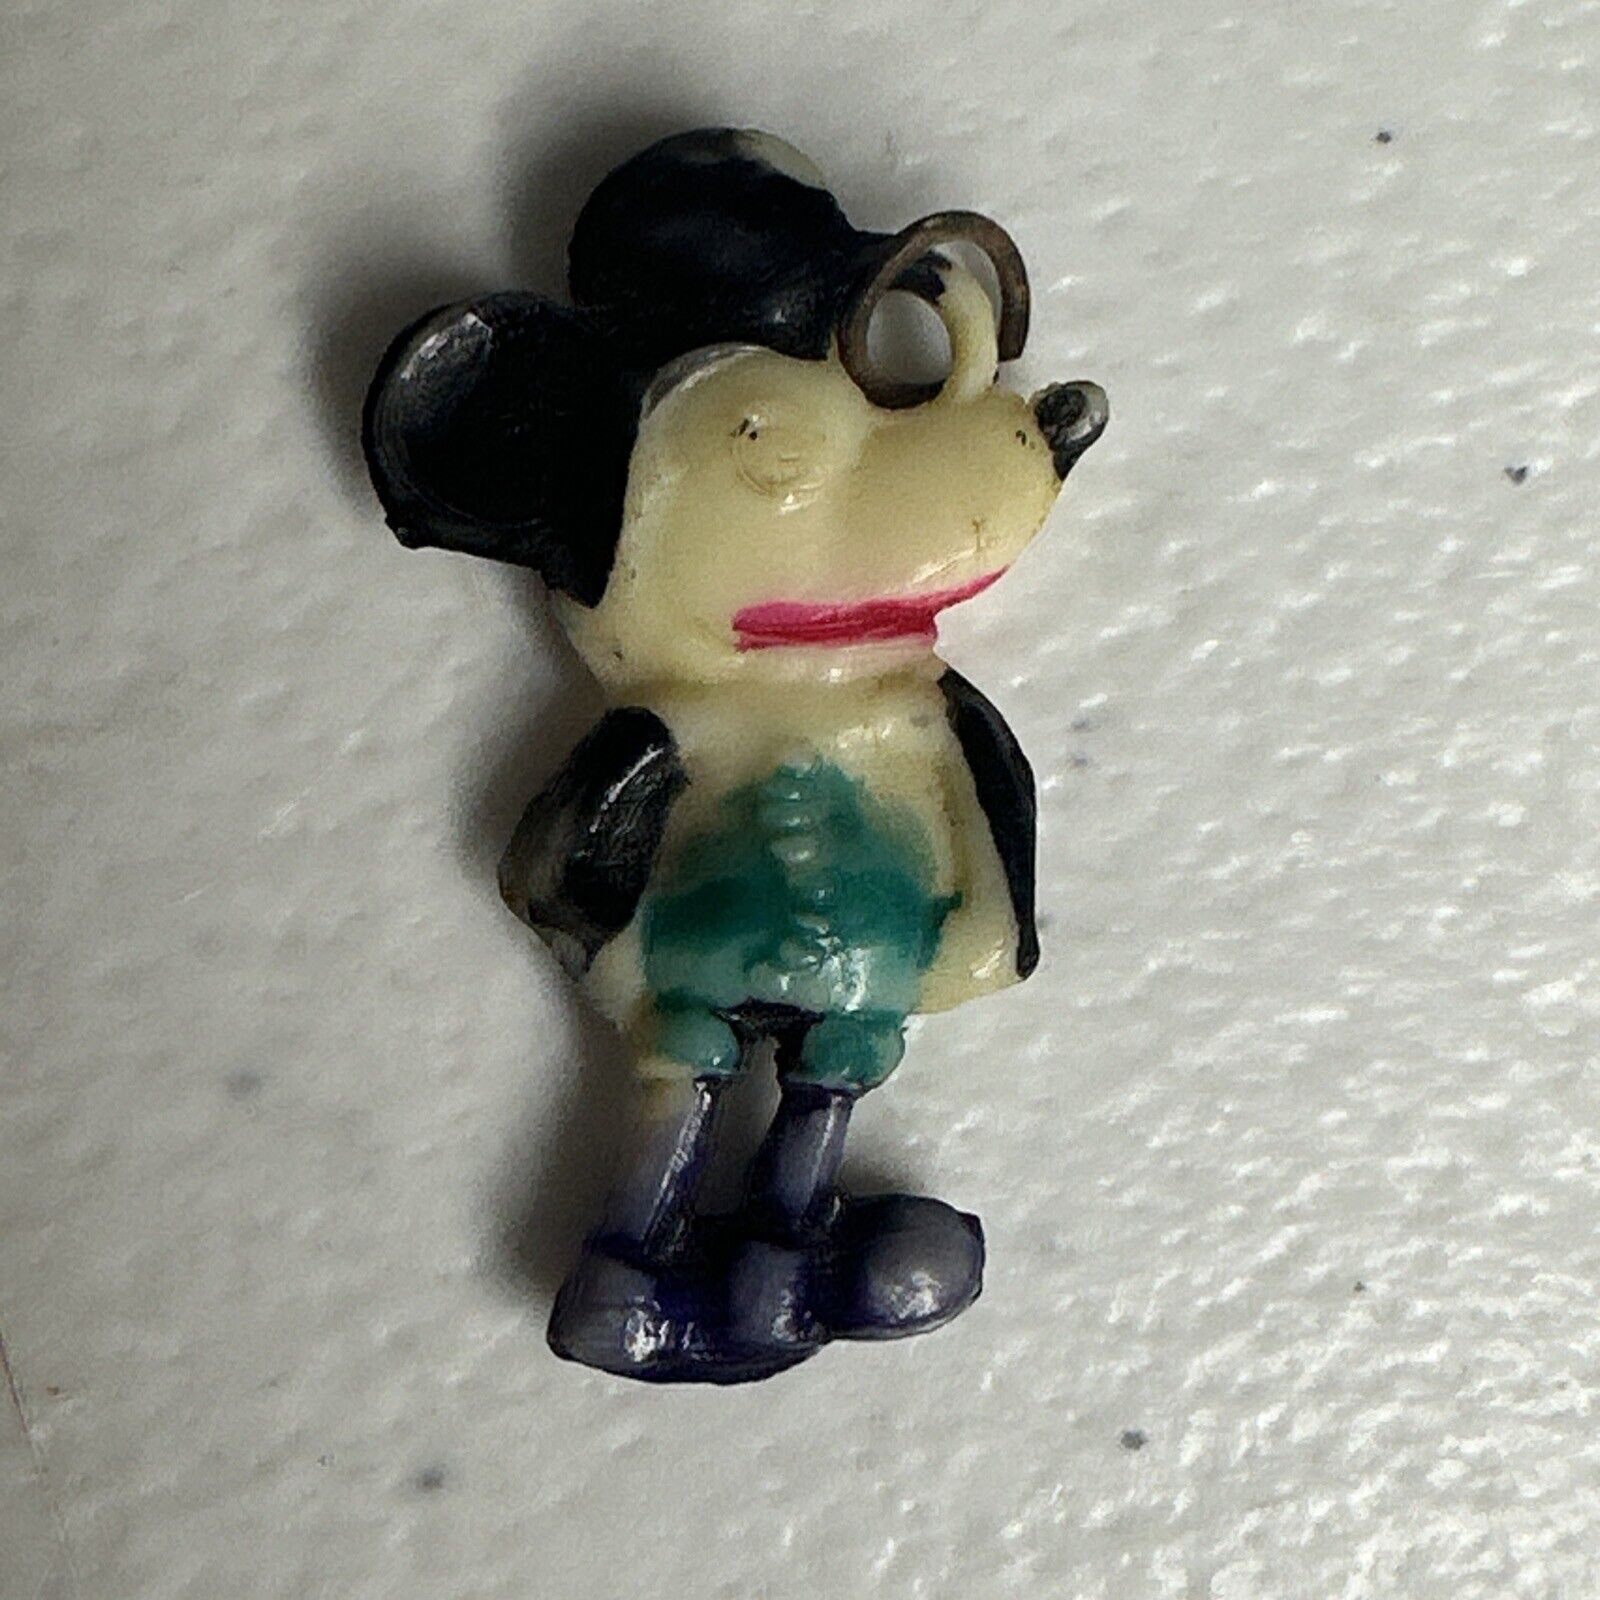 Antique Mickey Mouse Celluloid Charm, 1930s Disney Collectible, Rare Find